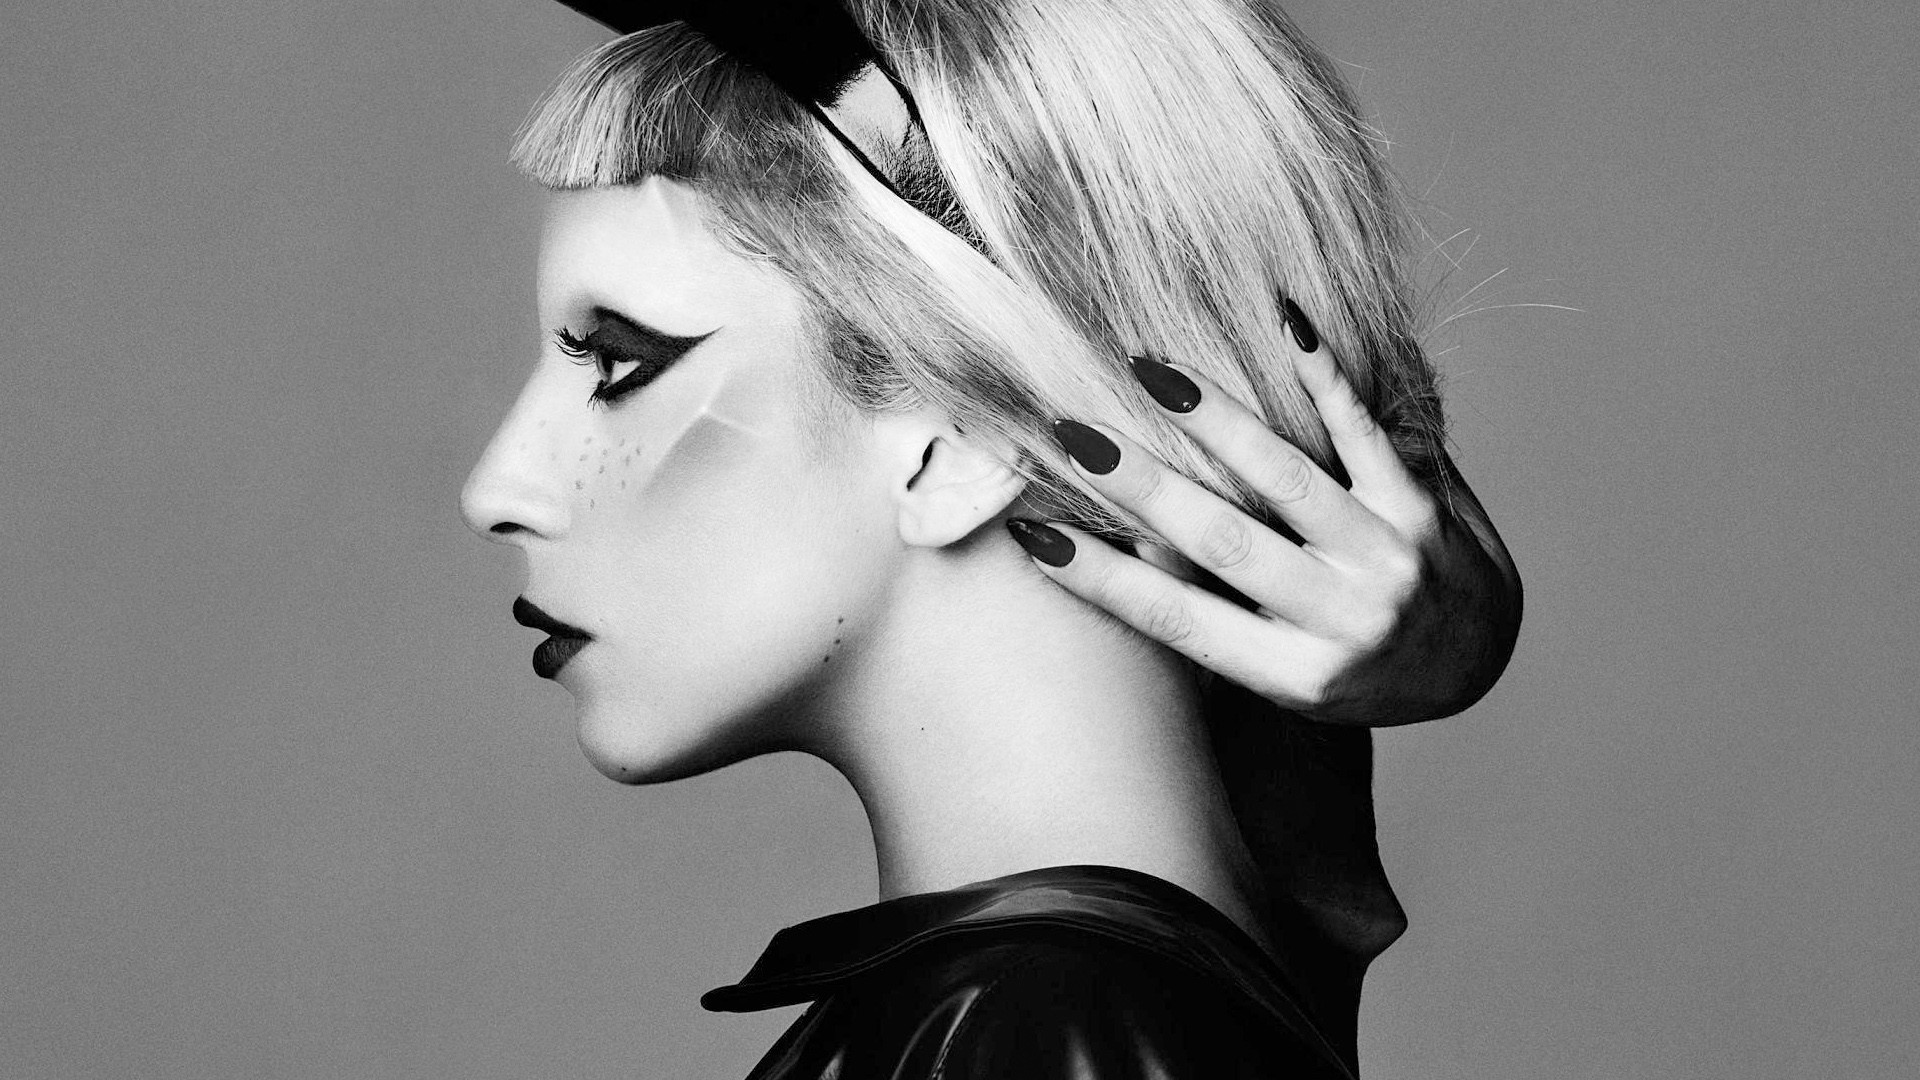 1920x1080 Lady Gaga Wallpapers High Resolution and Quality Download